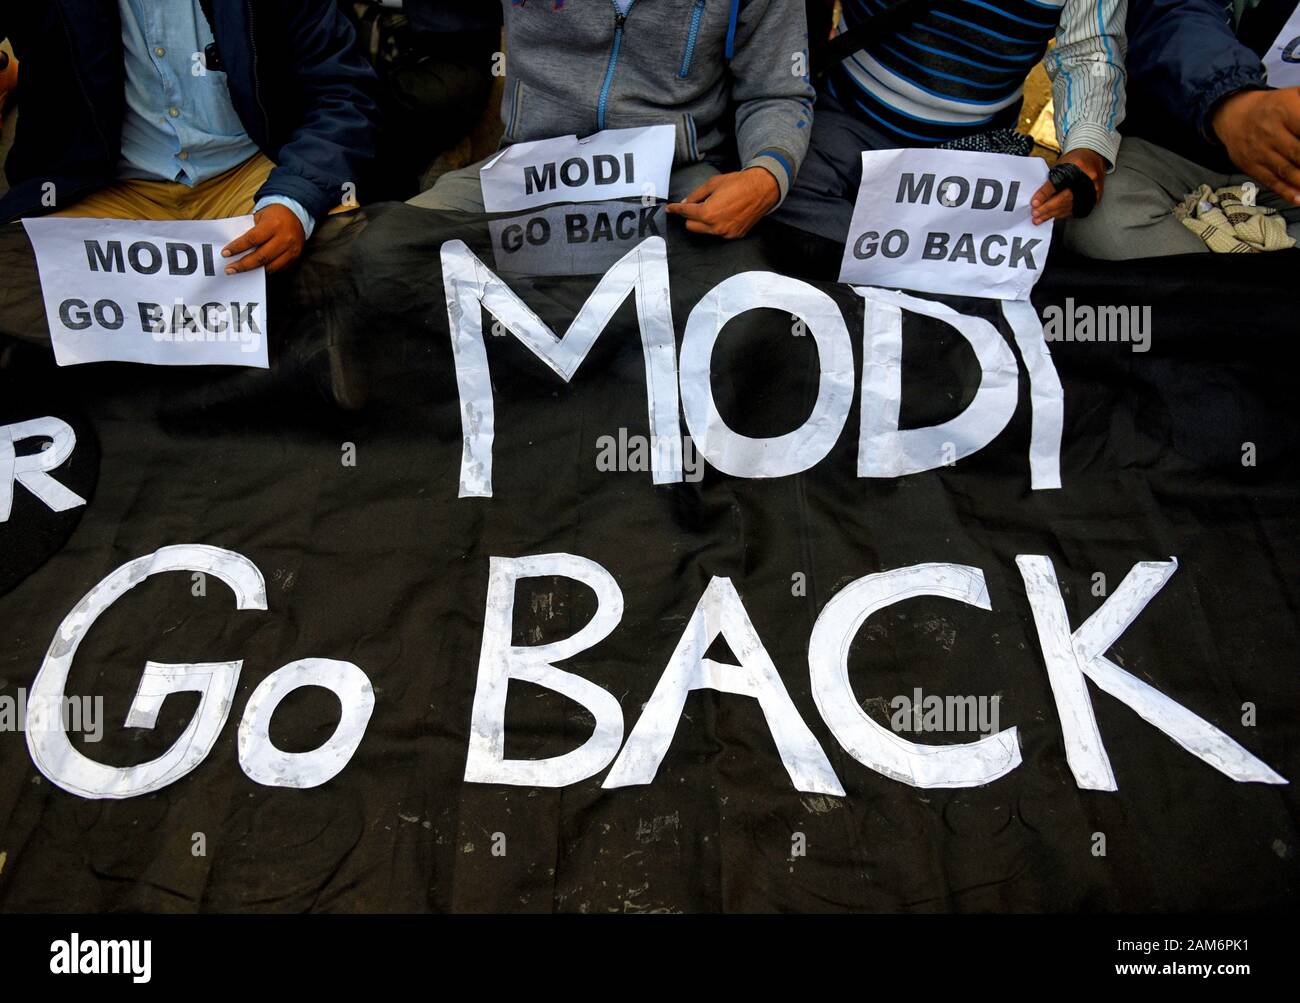 Kolkata, India. 11th Jan, 2019. Protesters hold placards during the demonstration.Demonstration against the visit of India's Prime Minister Narendra Modi and also against (Citizenship Amendment Bill) or CAB which grants Indian citizenship to non-Muslims of Afghanistan, Pakistan and Bangladesh that was passed by the Indian Government in December 2019 and has created violence, strike and protest all over the India. Credit: Avishek Das/SOPA Images/ZUMA Wire/Alamy Live News Stock Photo